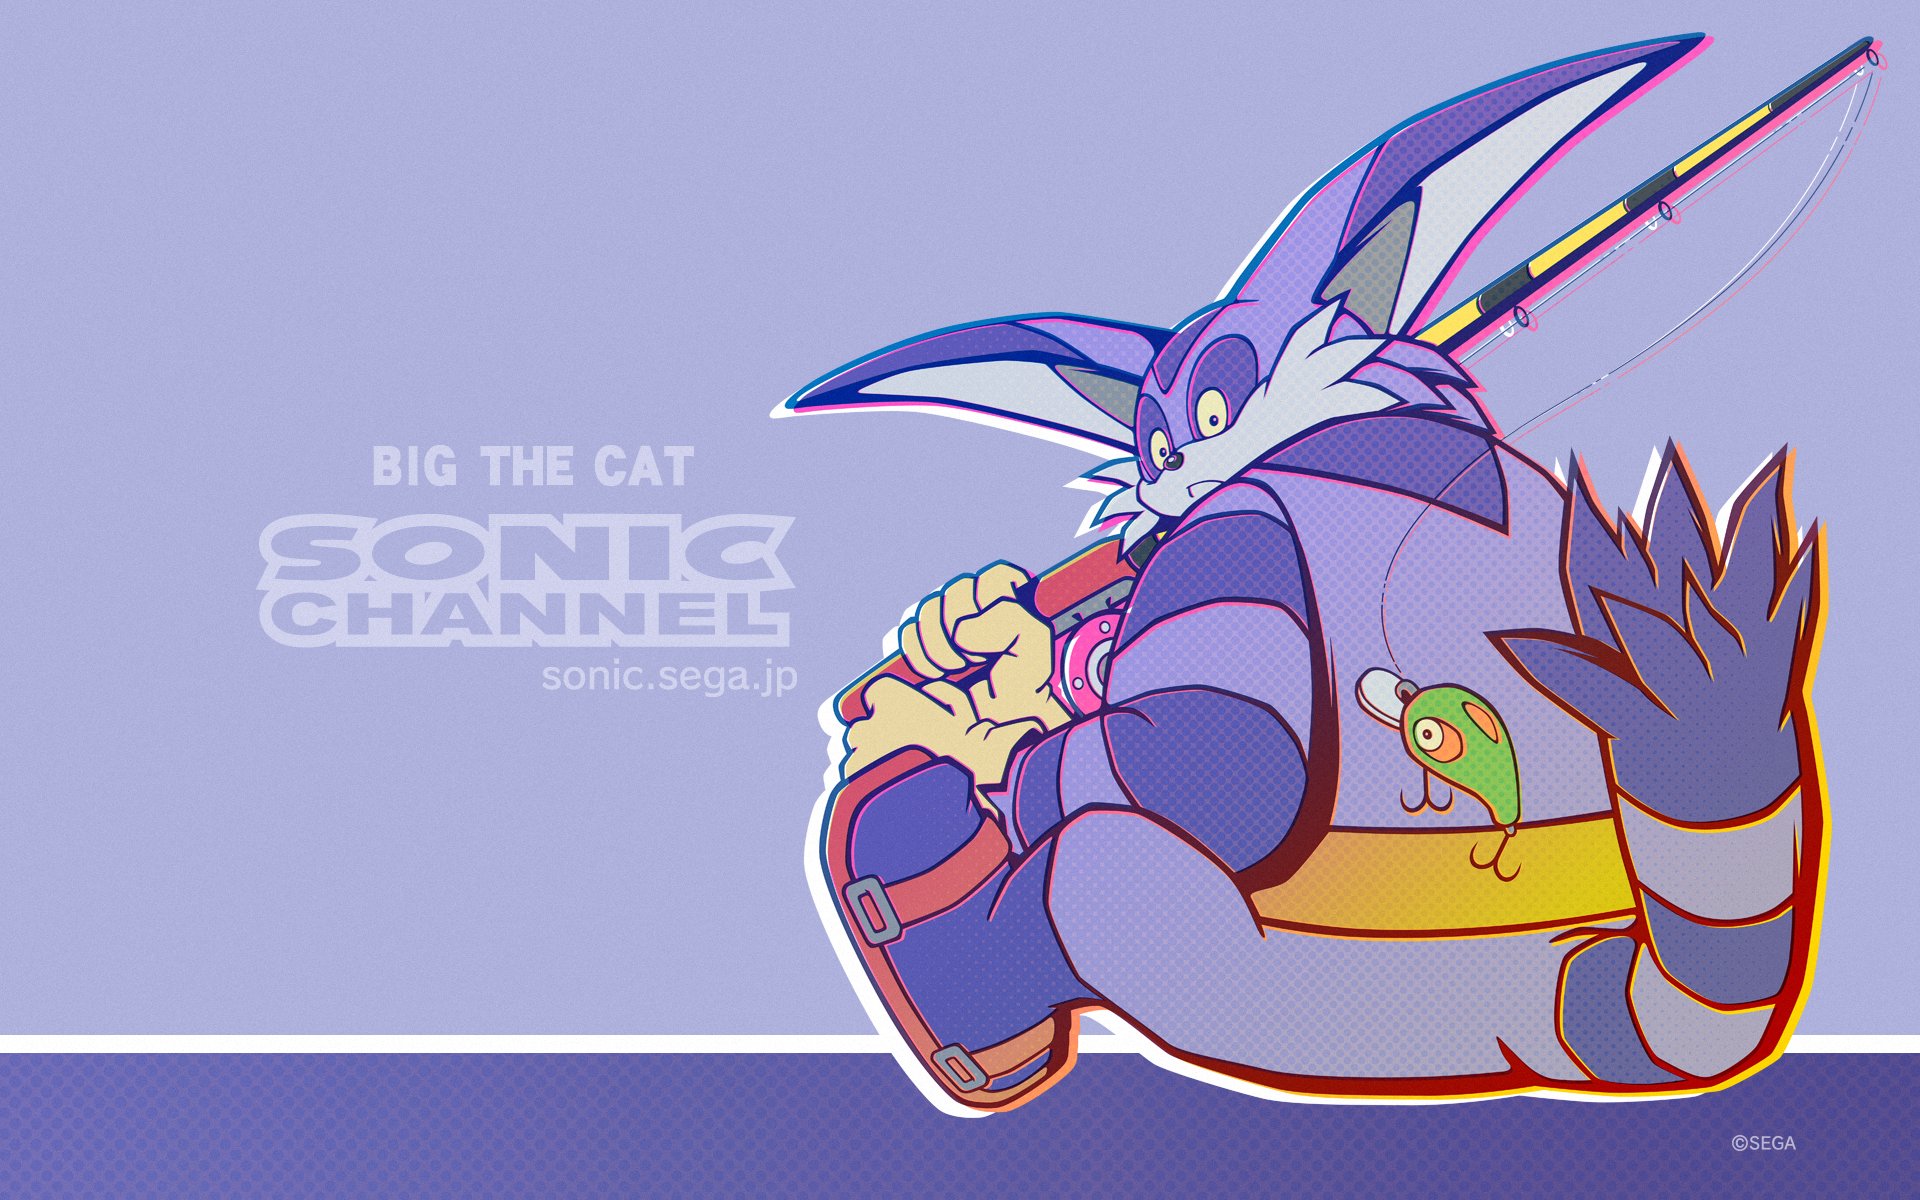 video game, sonic the hedgehog, big the cat, sonic channel, sonic